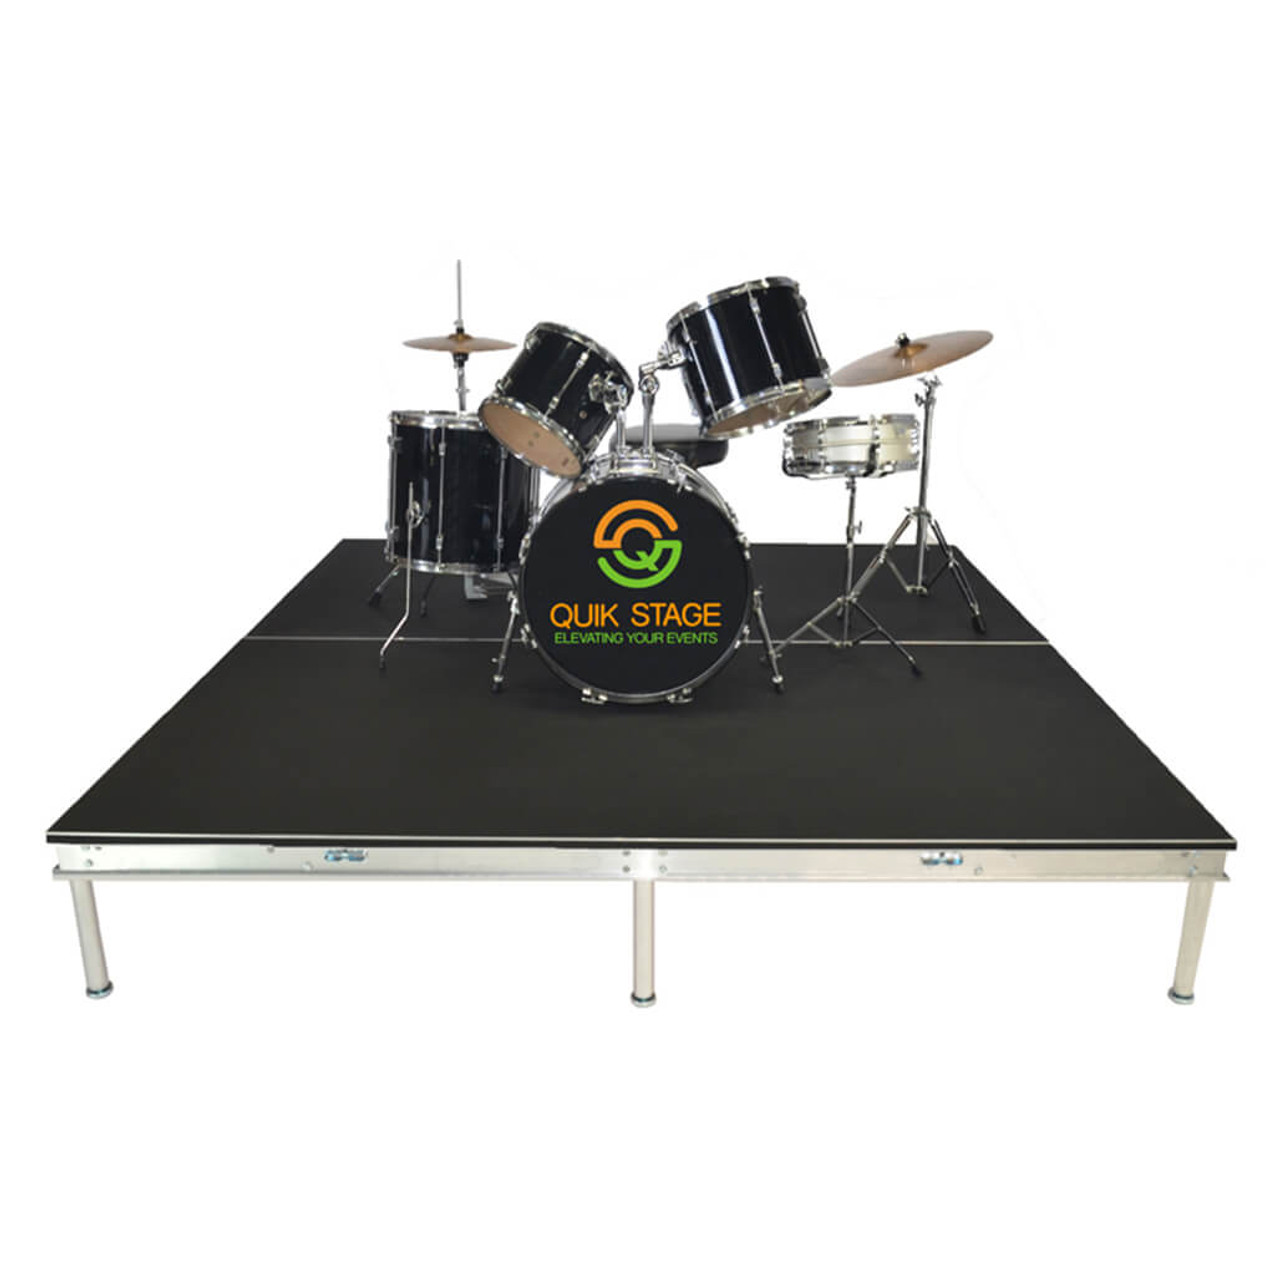 Quik Stage 16' x 36' High Portable Stage Package with Black Polyvinyl Non-Skid Surface. Additional Heights and Surfaces Available - Drum Riser without skirting